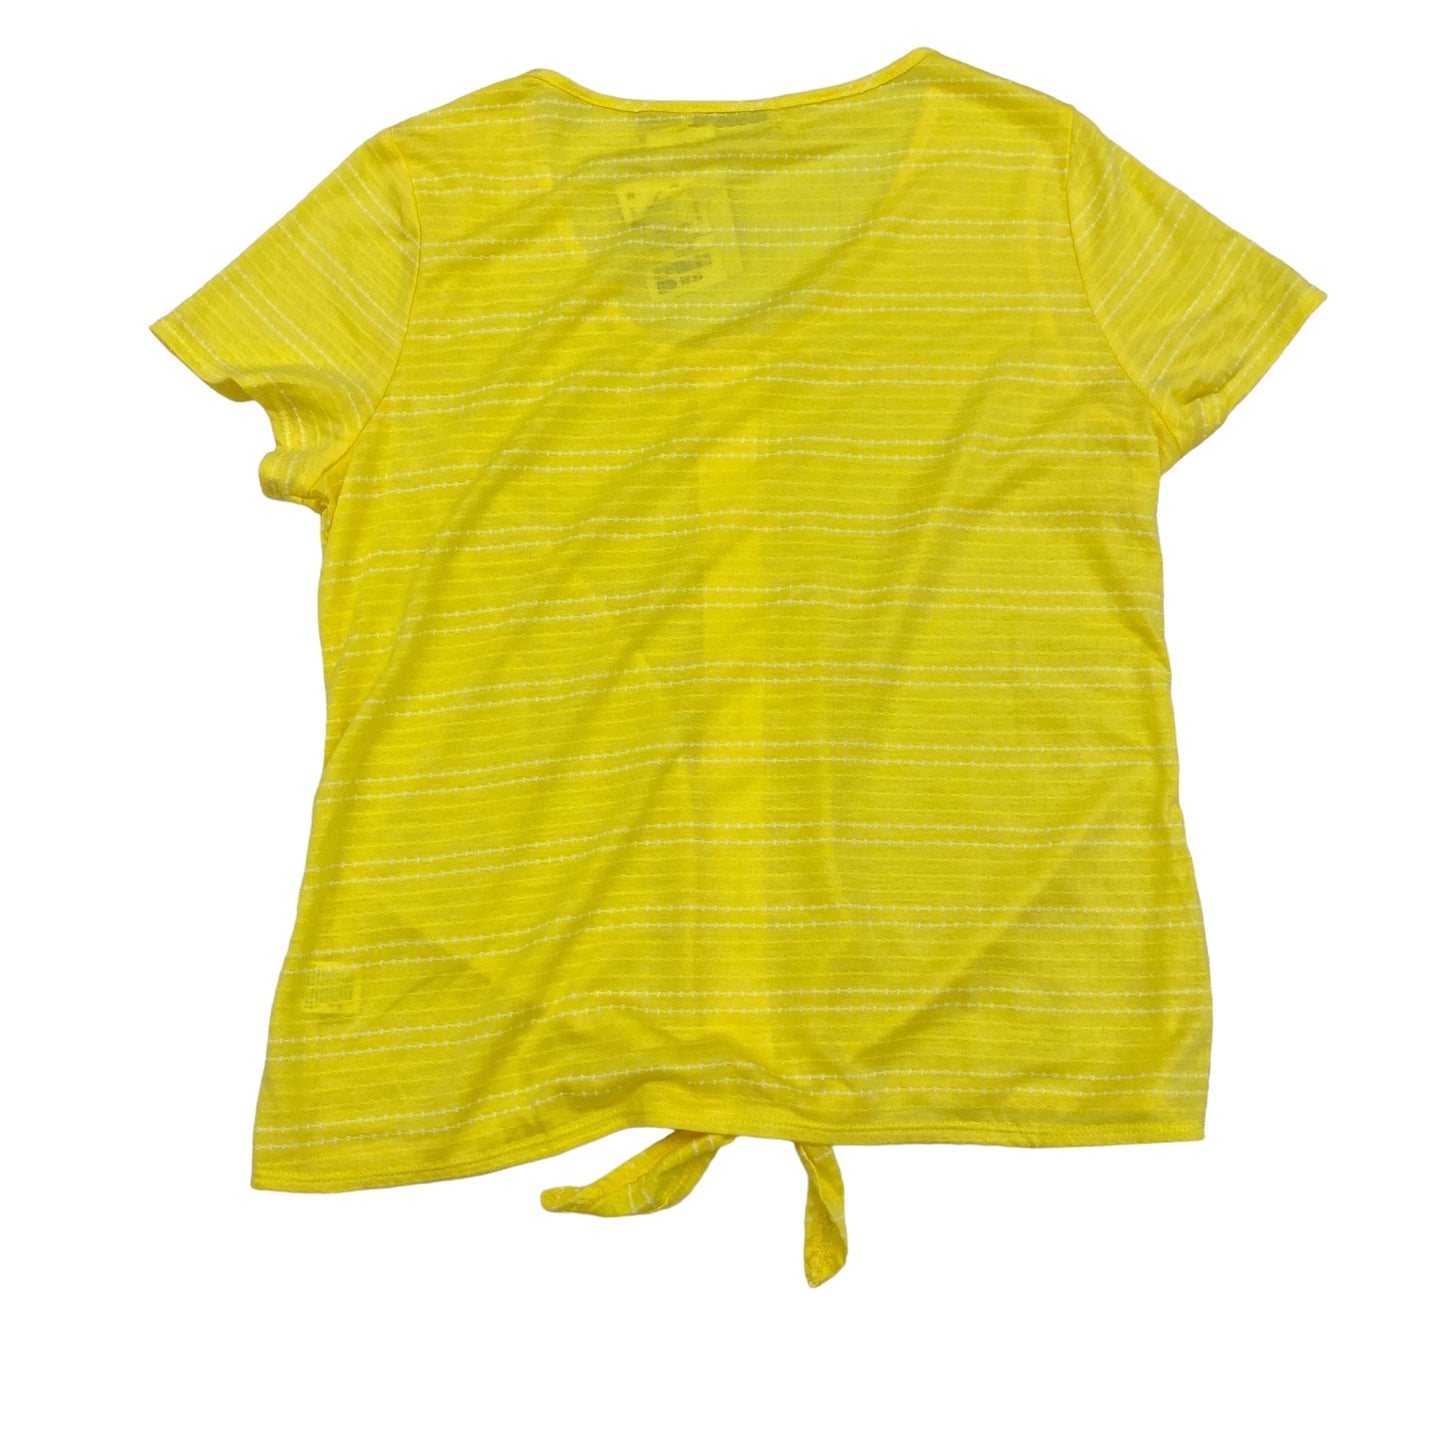 Yellow Top Short Sleeve Notations, Size L